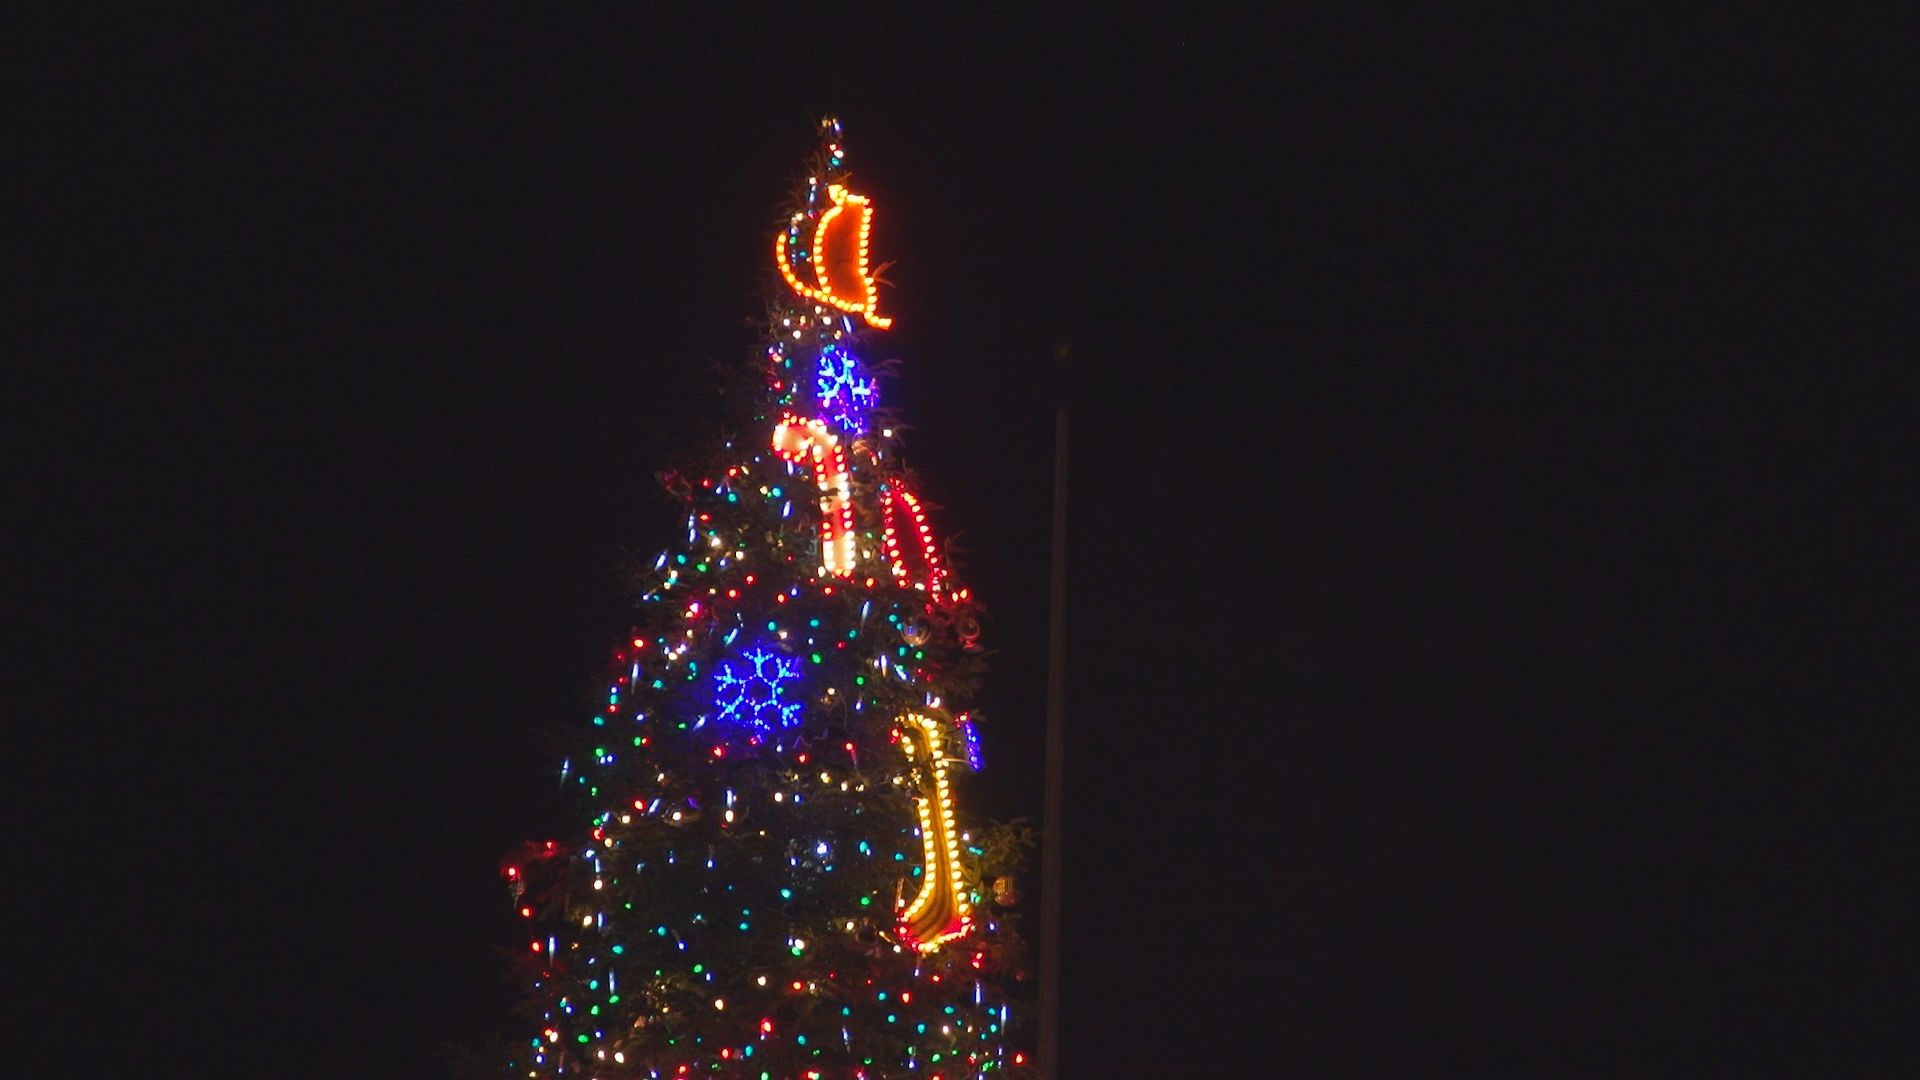 Sacramento officially kicked off the 2020 holiday season with the annual lighting of the Holiday Tree in Old Sacramento on the eve of Thanksgiving.